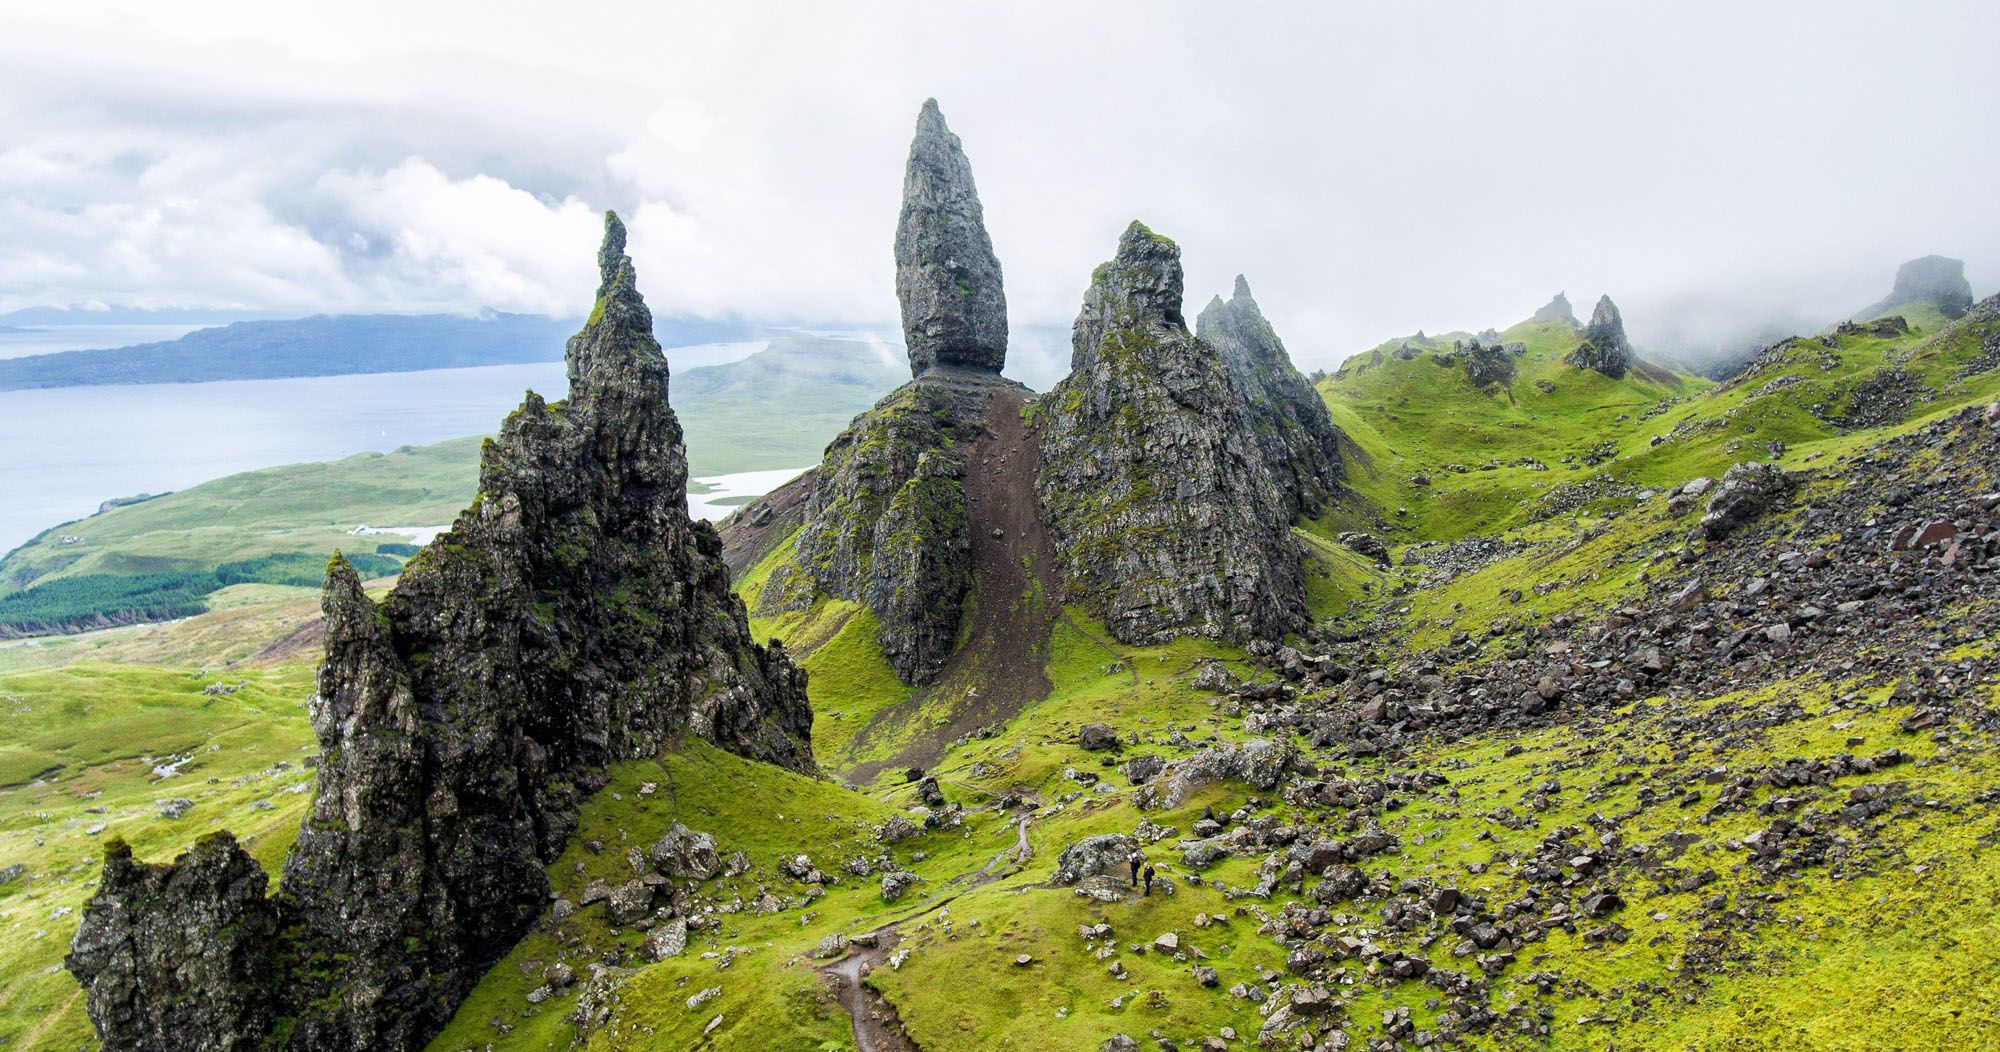 Featured image for “How to Visit the Old Man of Storr, Isle of Skye, Scotland”